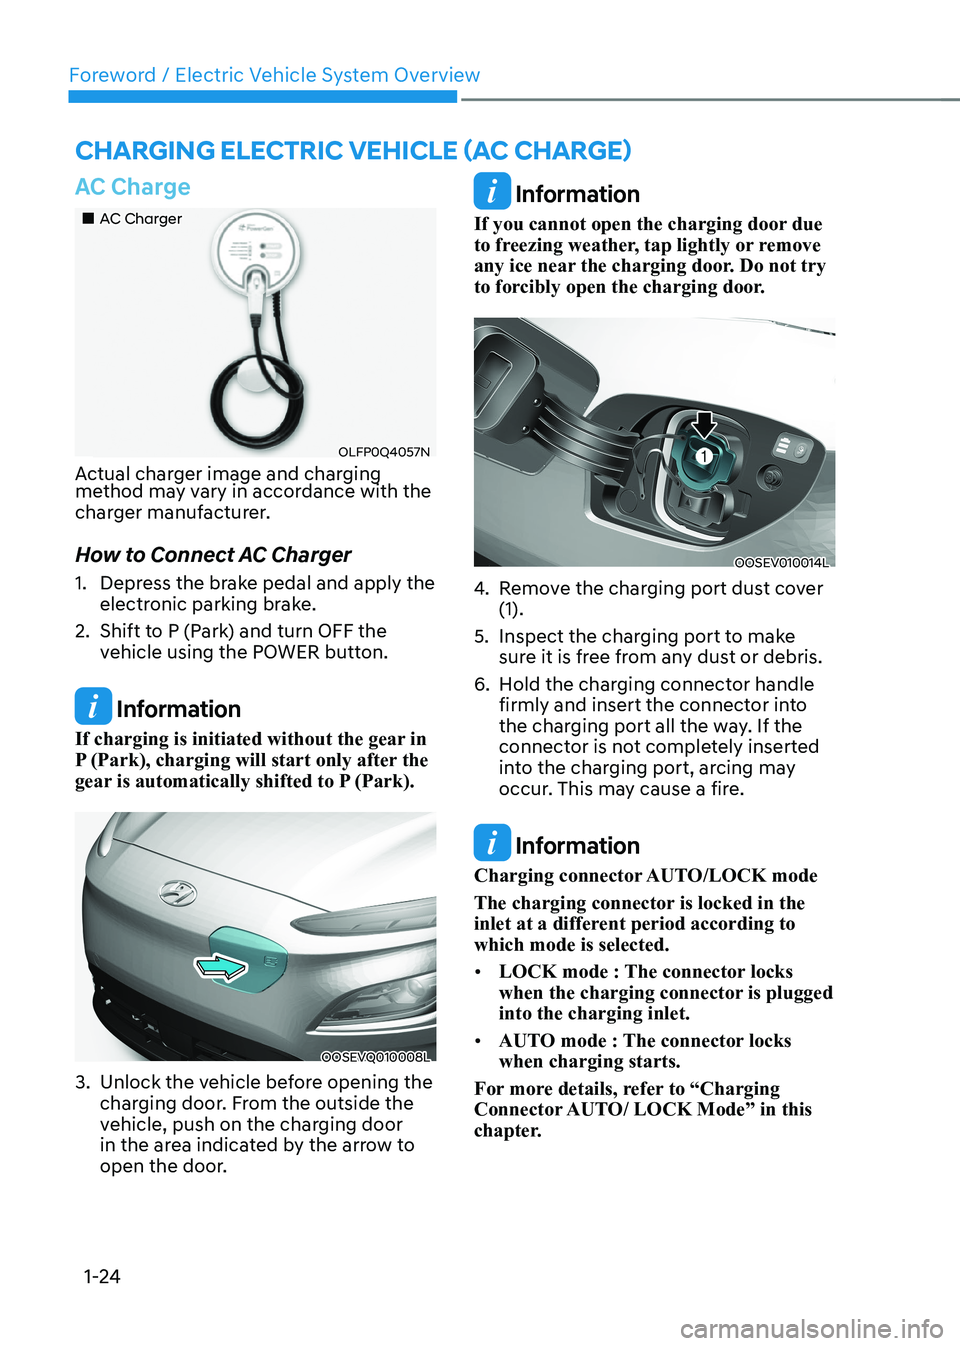 HYUNDAI KONA EV 2023  Owners Manual Foreword / Electric Vehicle System Overview
1-24
AC Charge
„„AC Charger
OLFP0Q4057N
Actual charger image and charging  
method may vary in accordance with the  
charger manufacturer. 
How to